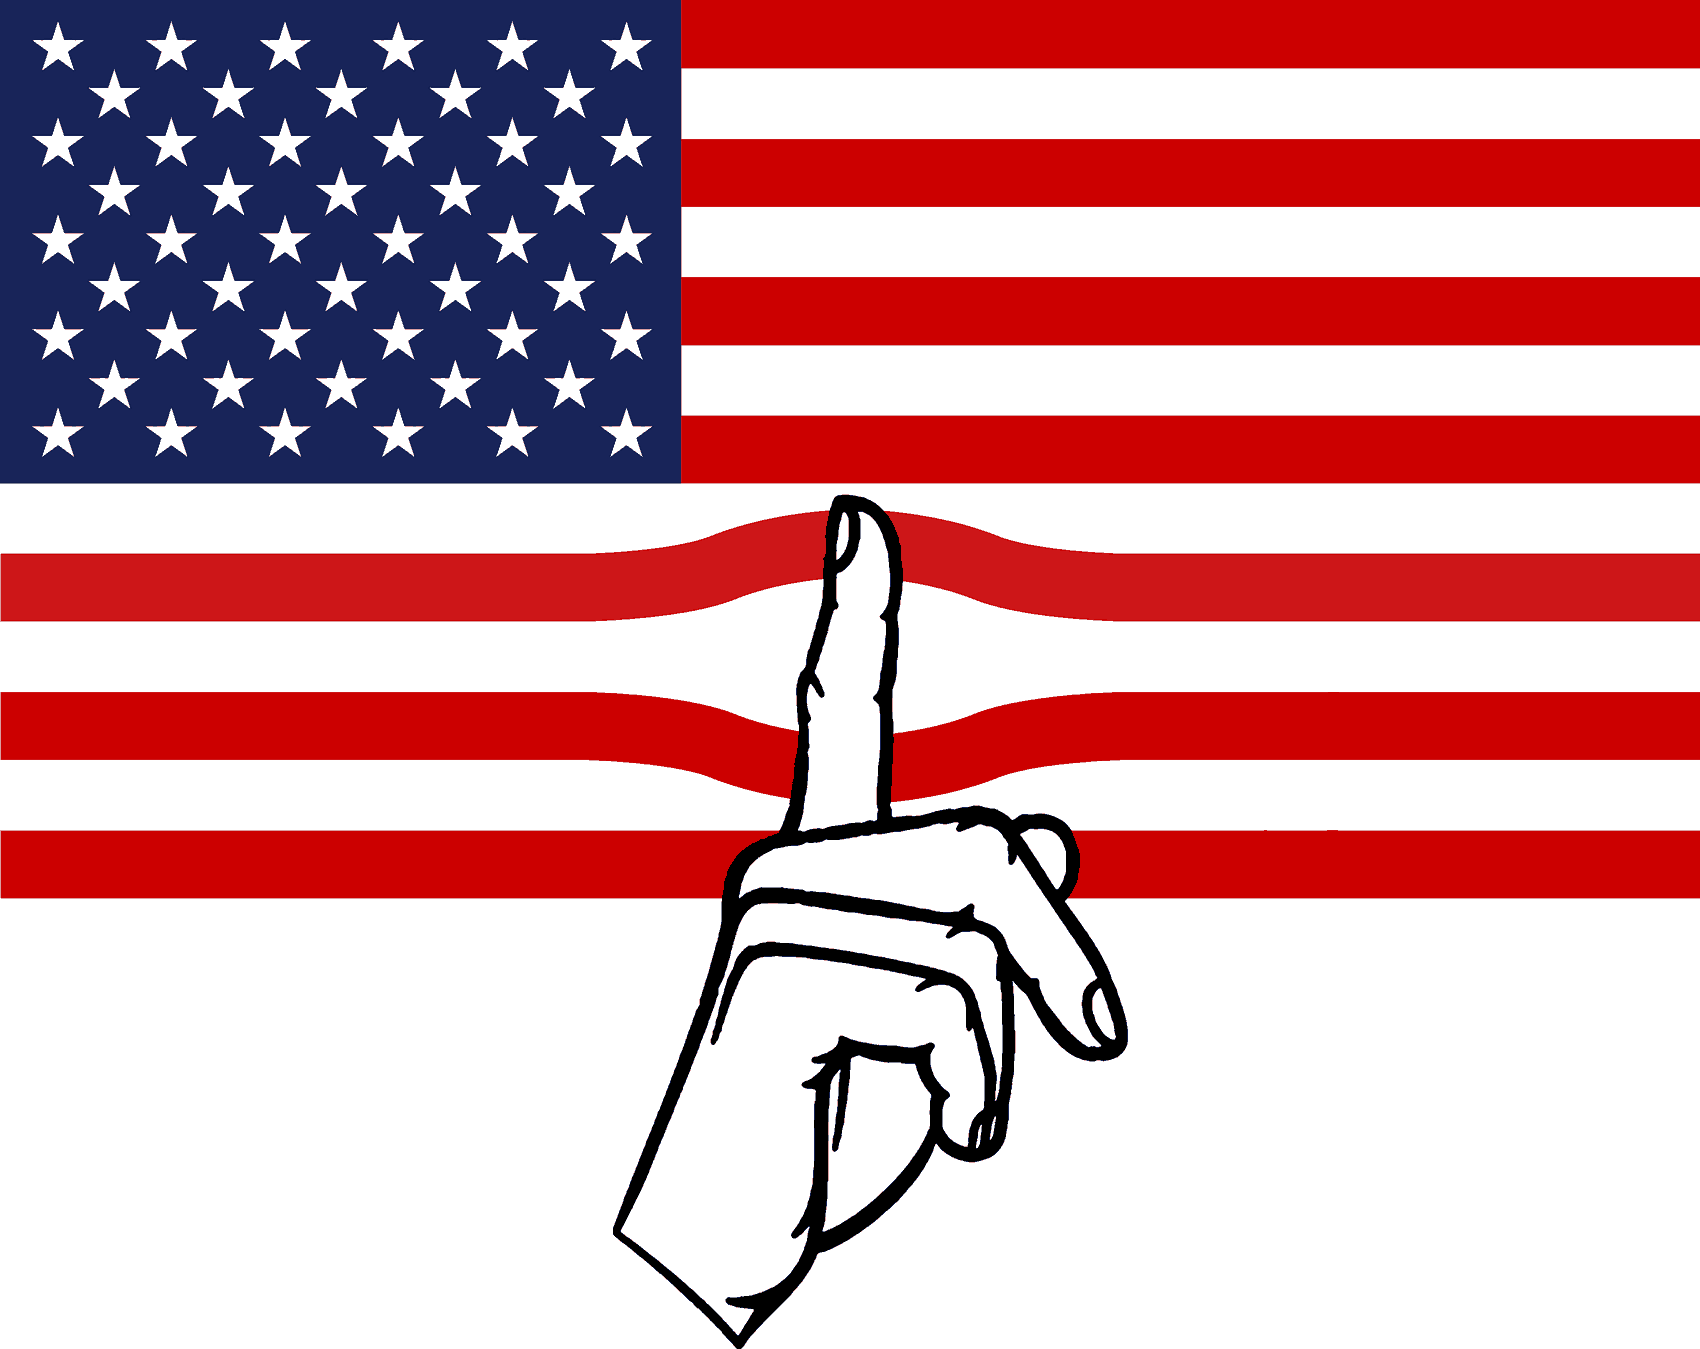 Illustration of the american flag